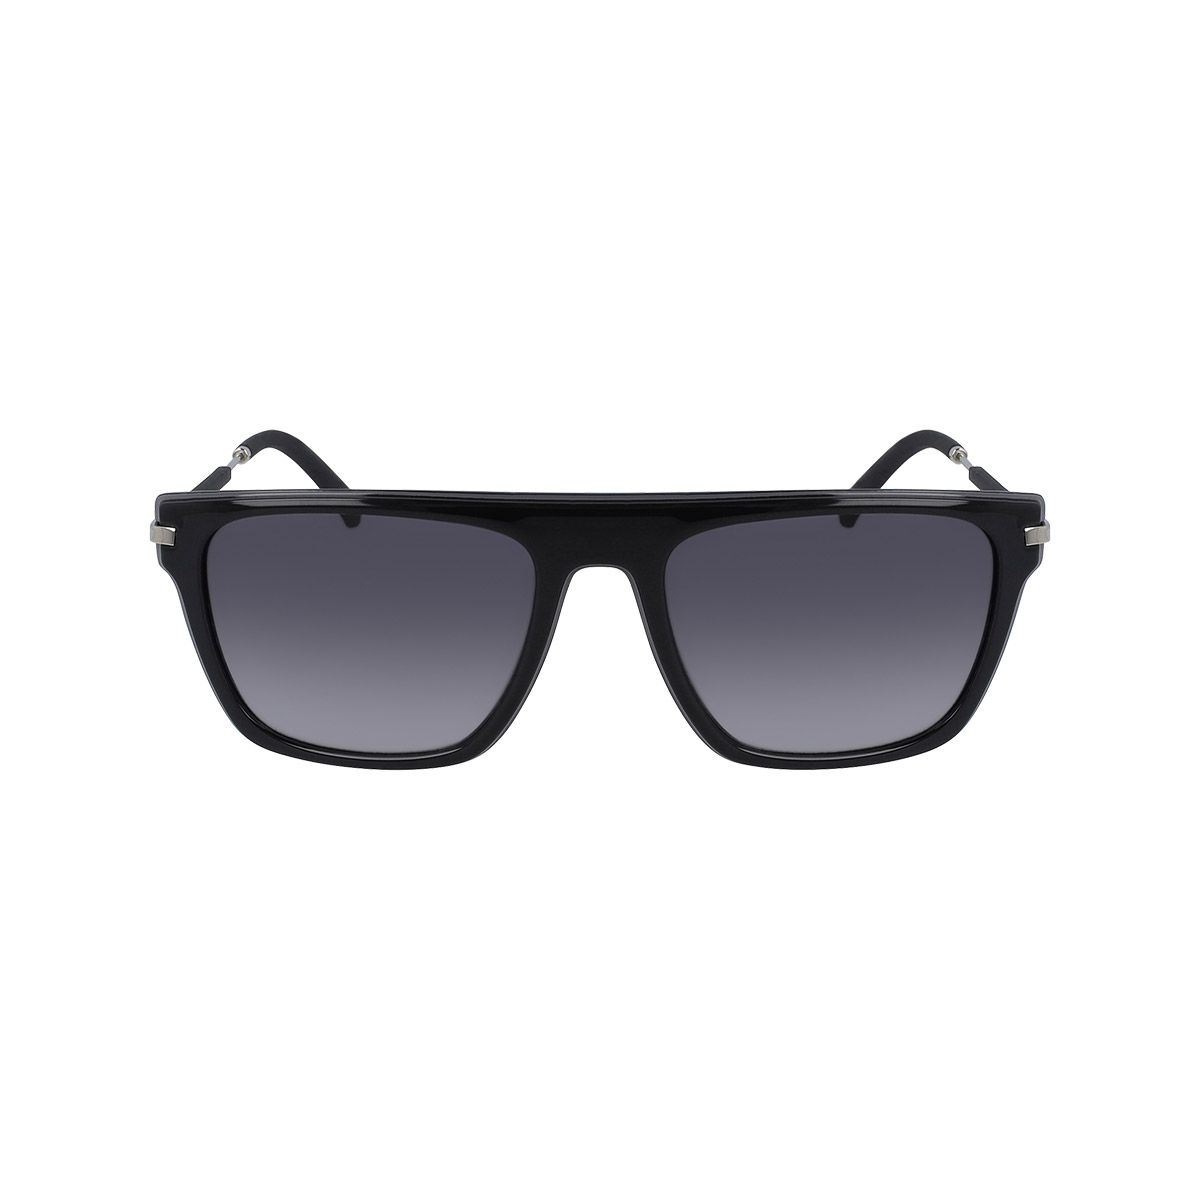 Calvin Klein Jeans Sunglasses with Grey Lens for Unisex Buy Calvin Klein  Jeans Sunglasses with Grey Lens for Unisex Online at Best Price in India   Nykaa